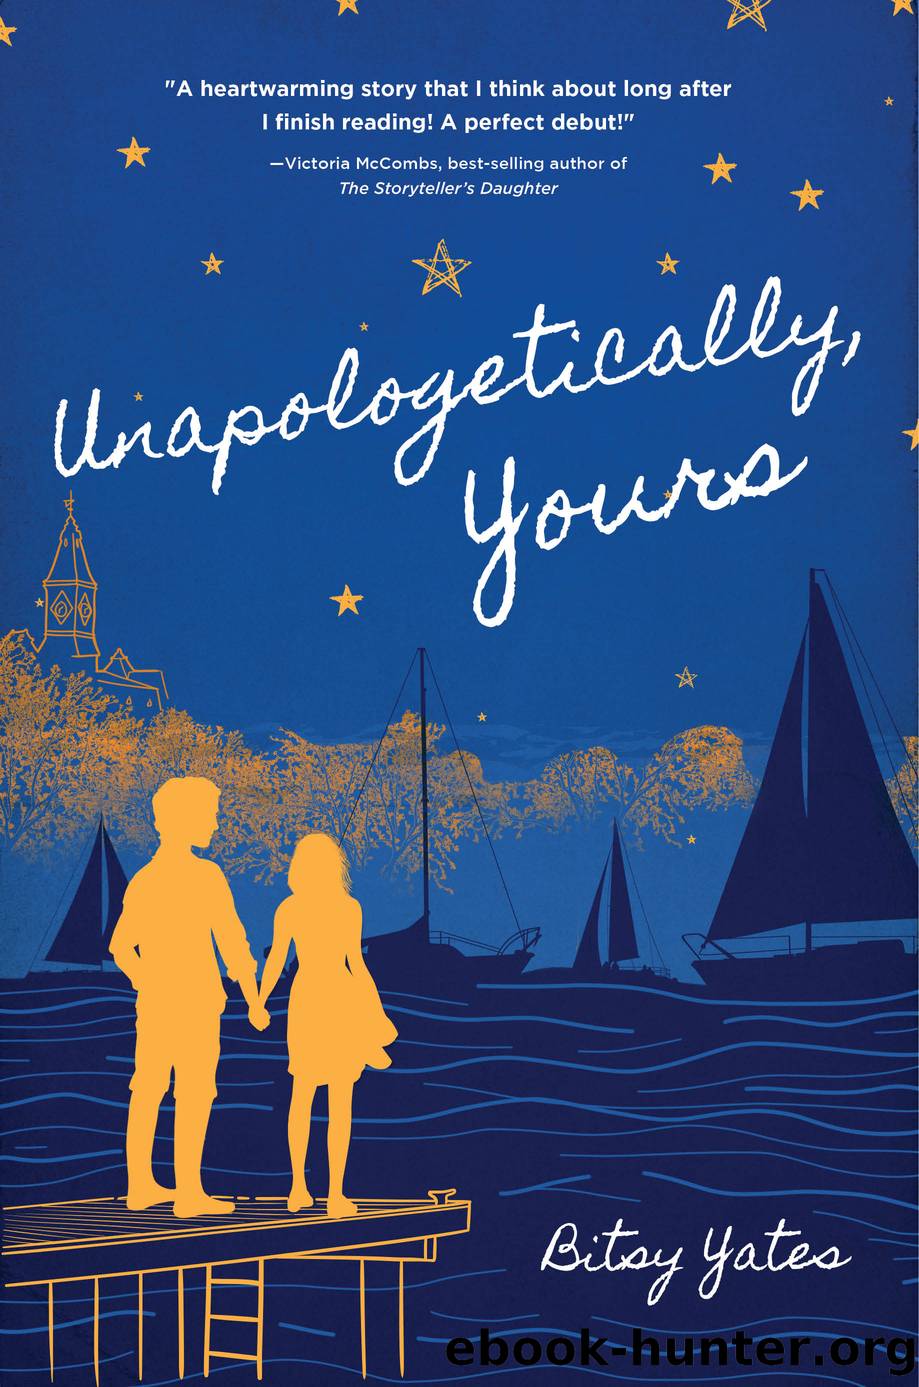 Unapologetically Yours by Bitsy Yates